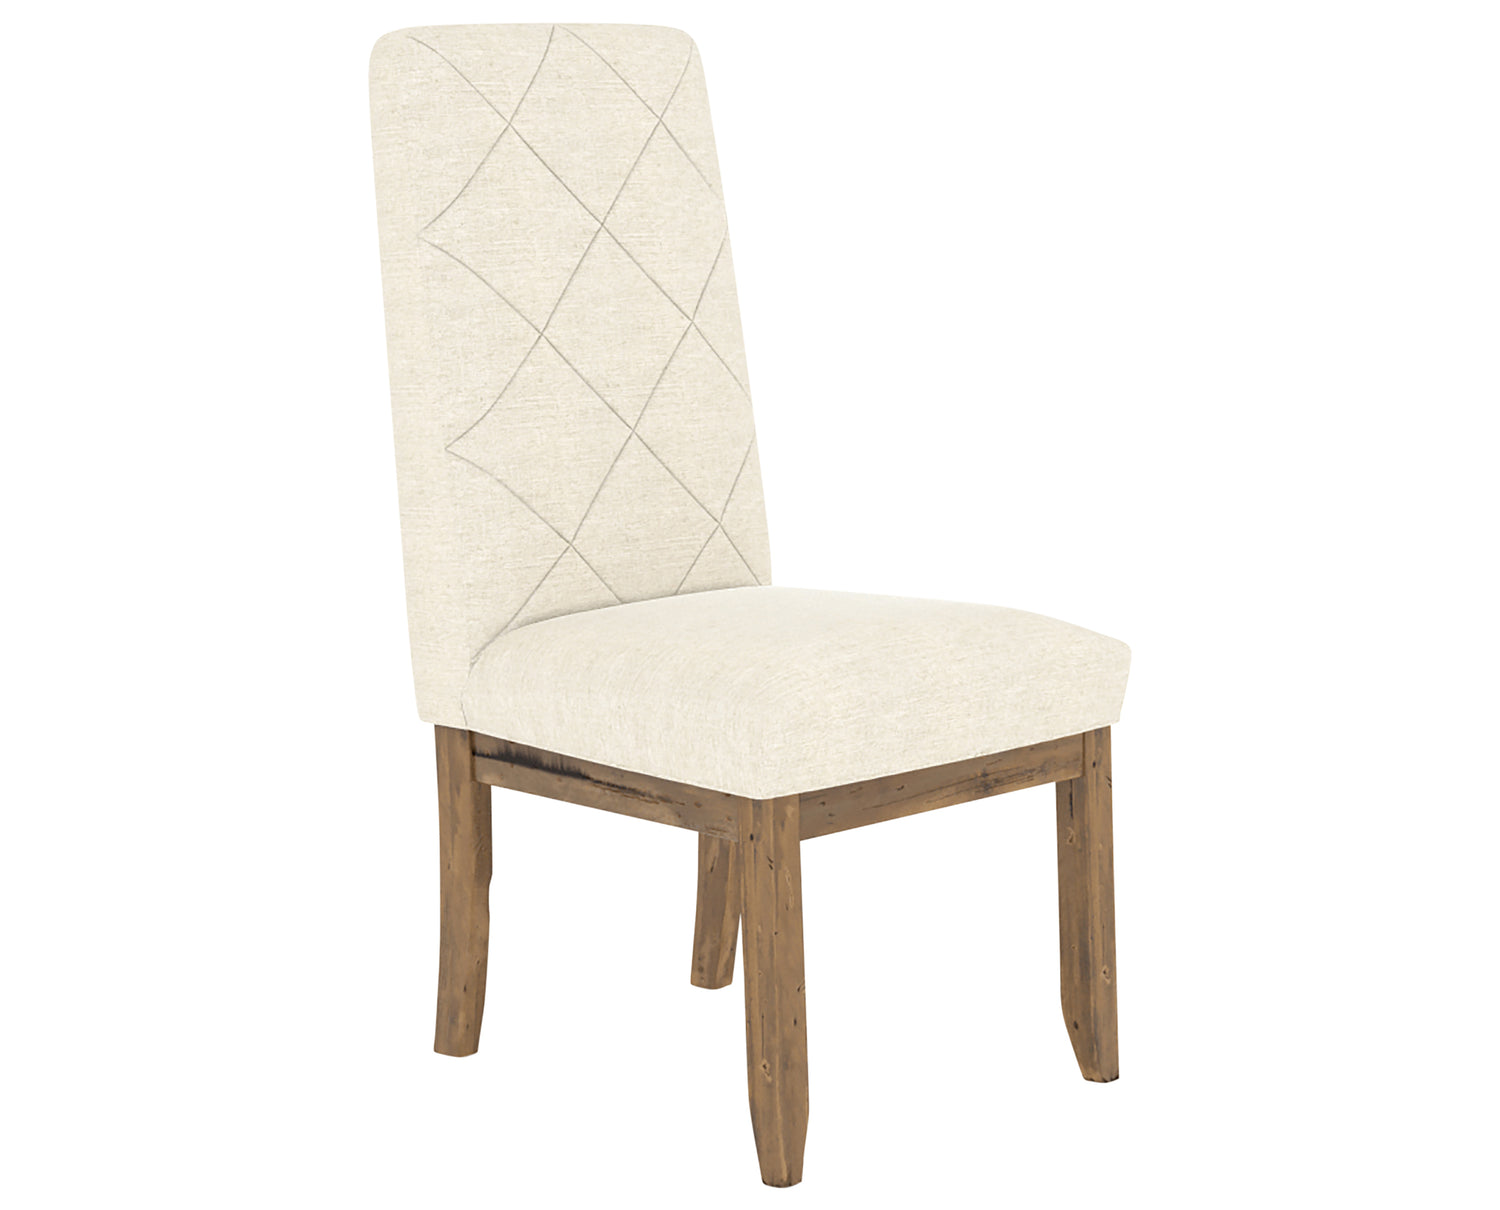 Oak Washed and Quilted Fabric TW | Canadel Champlain Dining Chair 0138 | Valley Ridge Furniture